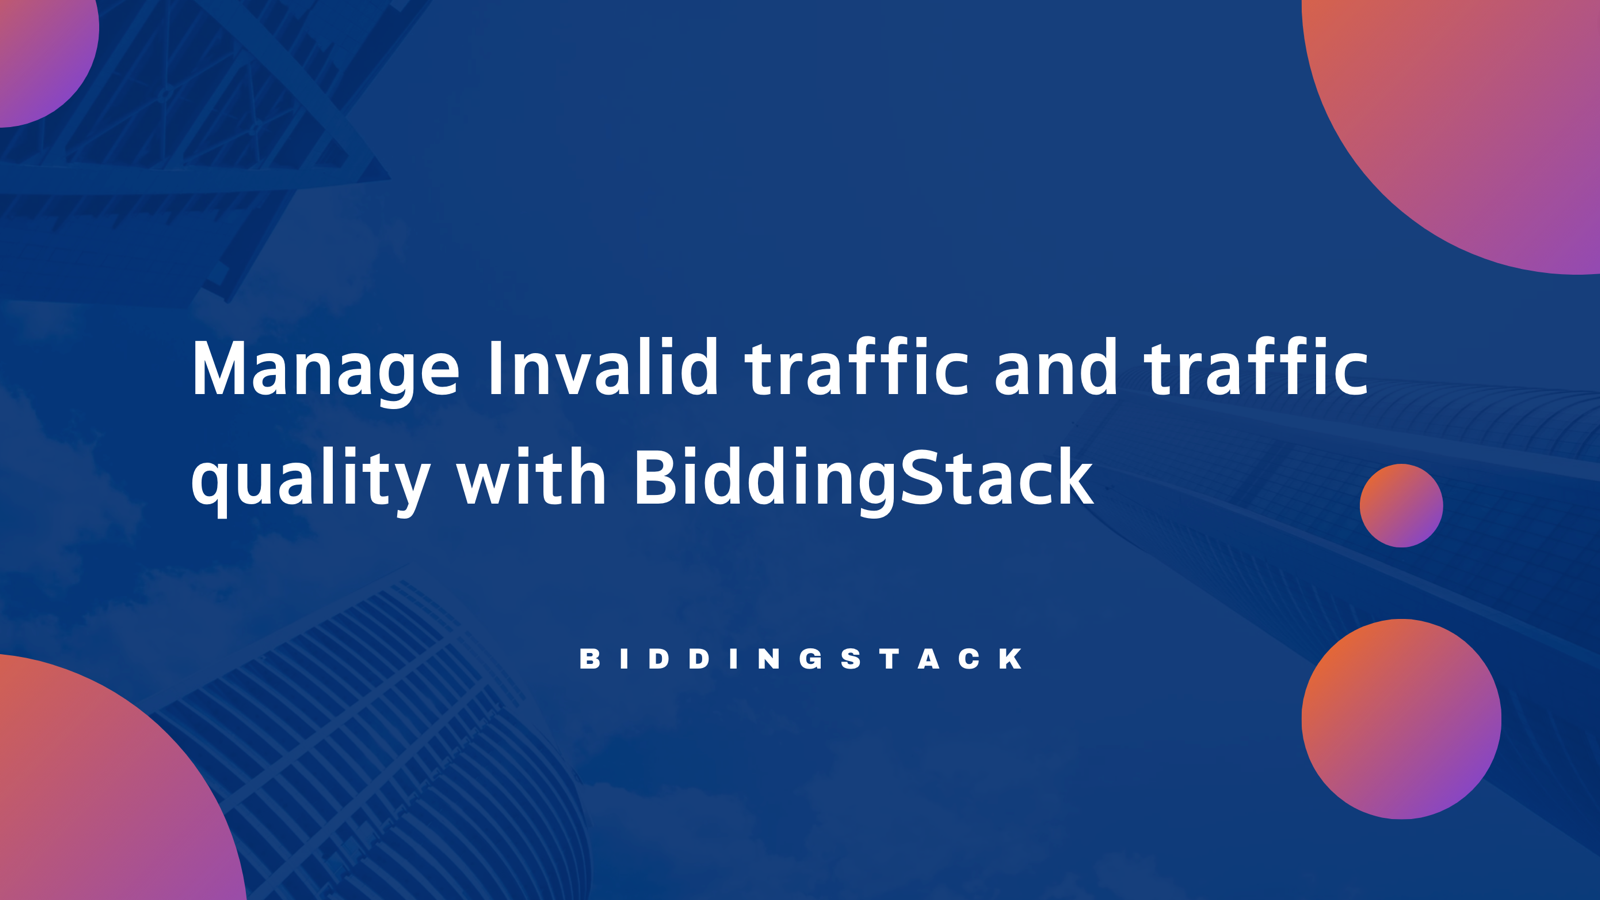 Manage invalid traffic (IVT) and traffic quality with BiddingStack